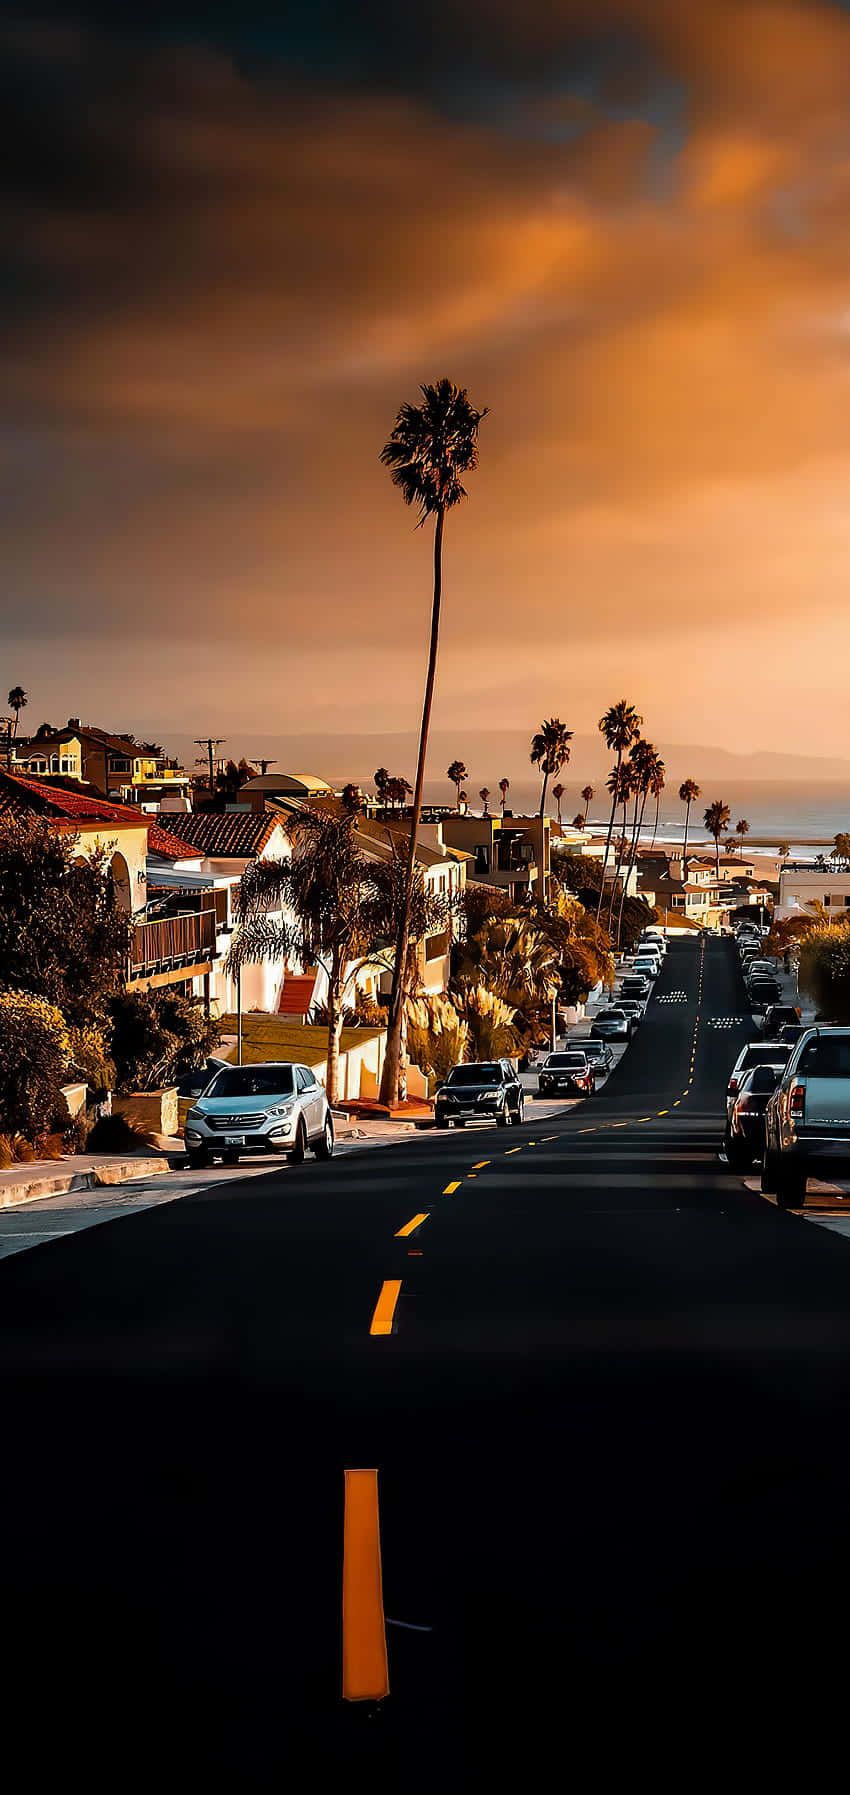  California Hintergrundbild 850x1795. Download A Street With Palm Trees And Cars At Sunset Wallpaper